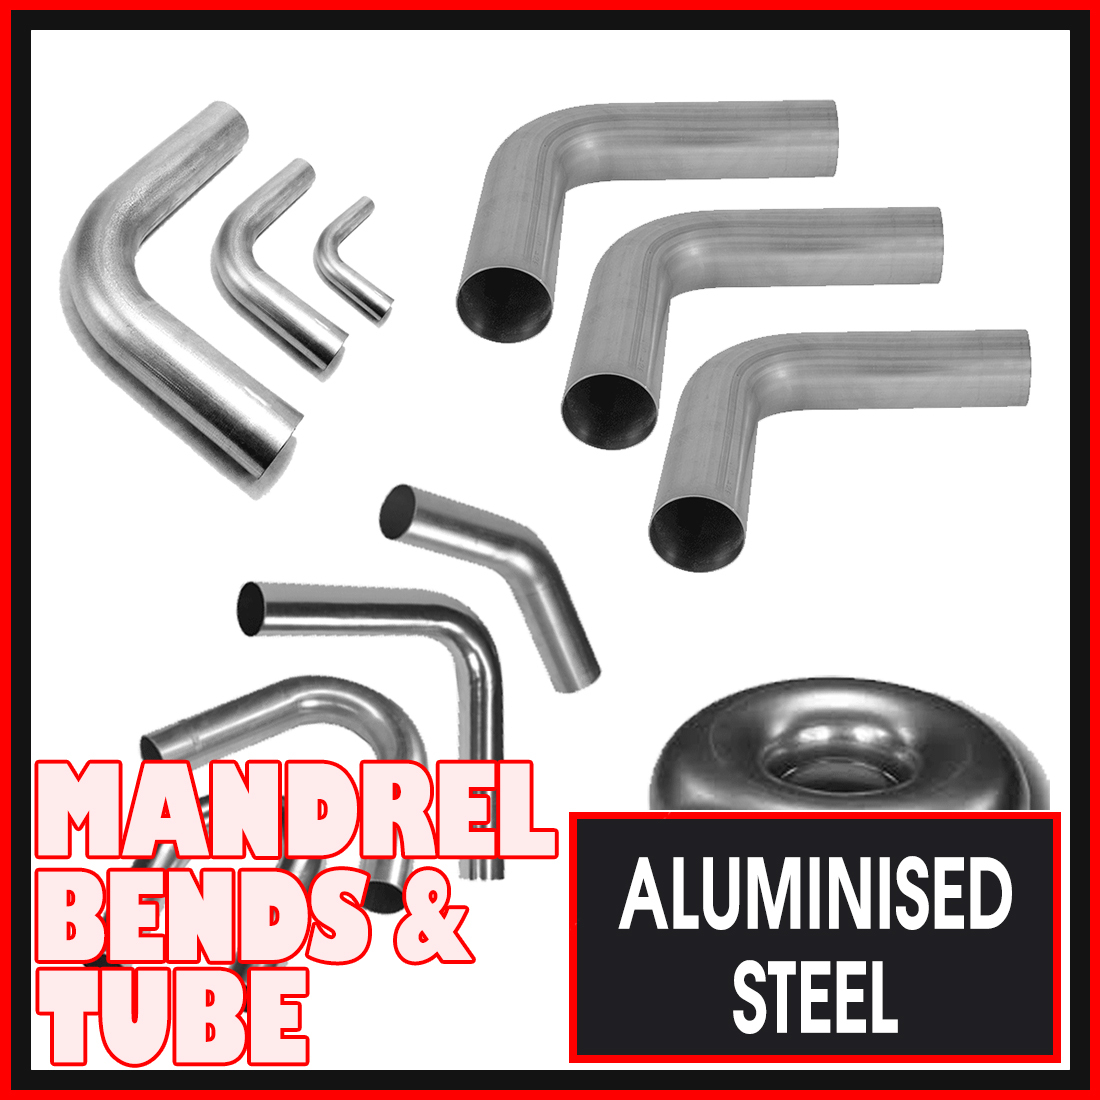 2" Aluminised Steel Mandrel Bends and Exhaust Pipe image